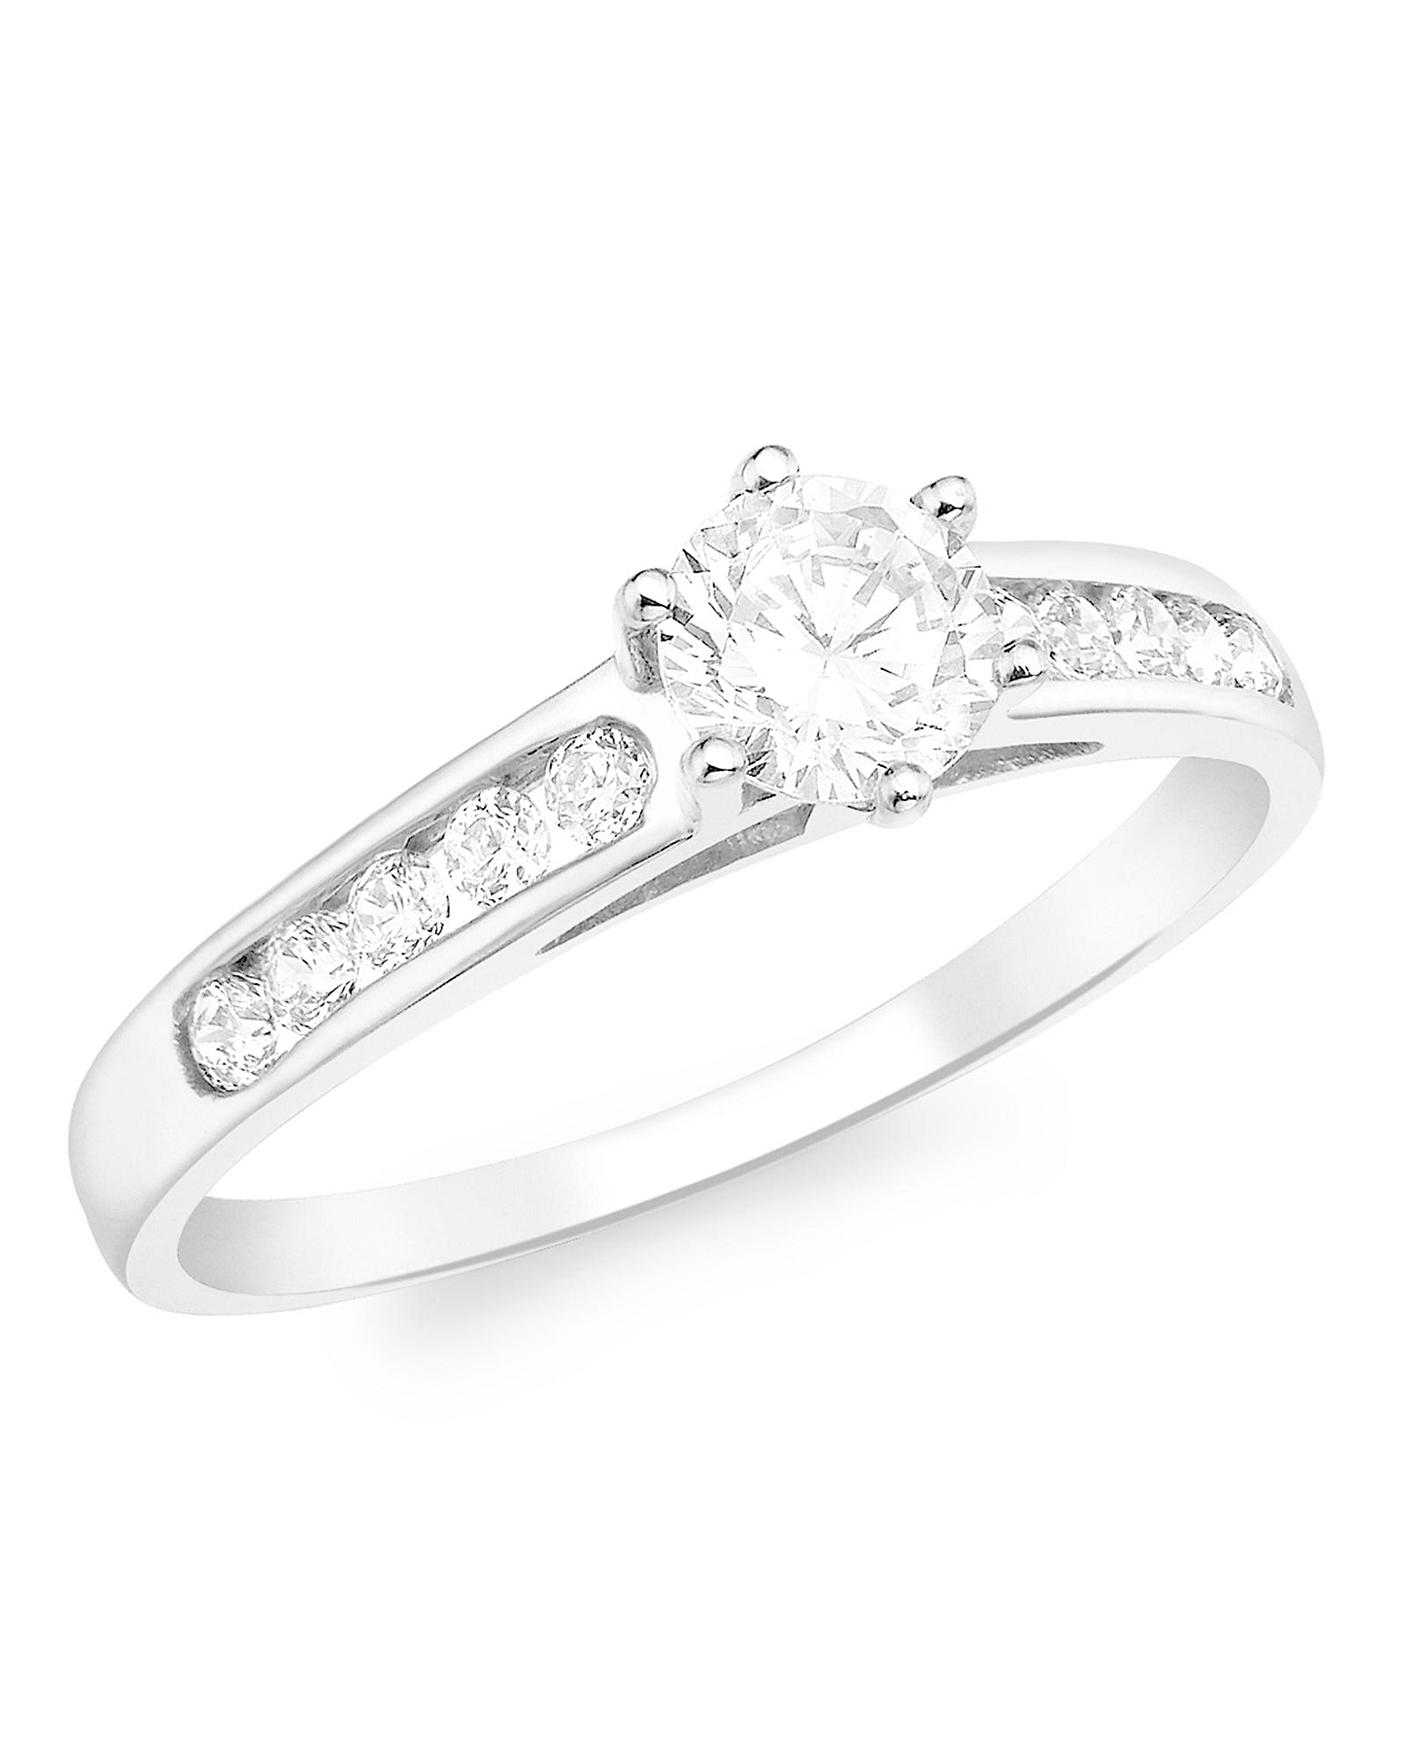 9 Carat White Gold Cubic Zirconia Ring | Simply Be